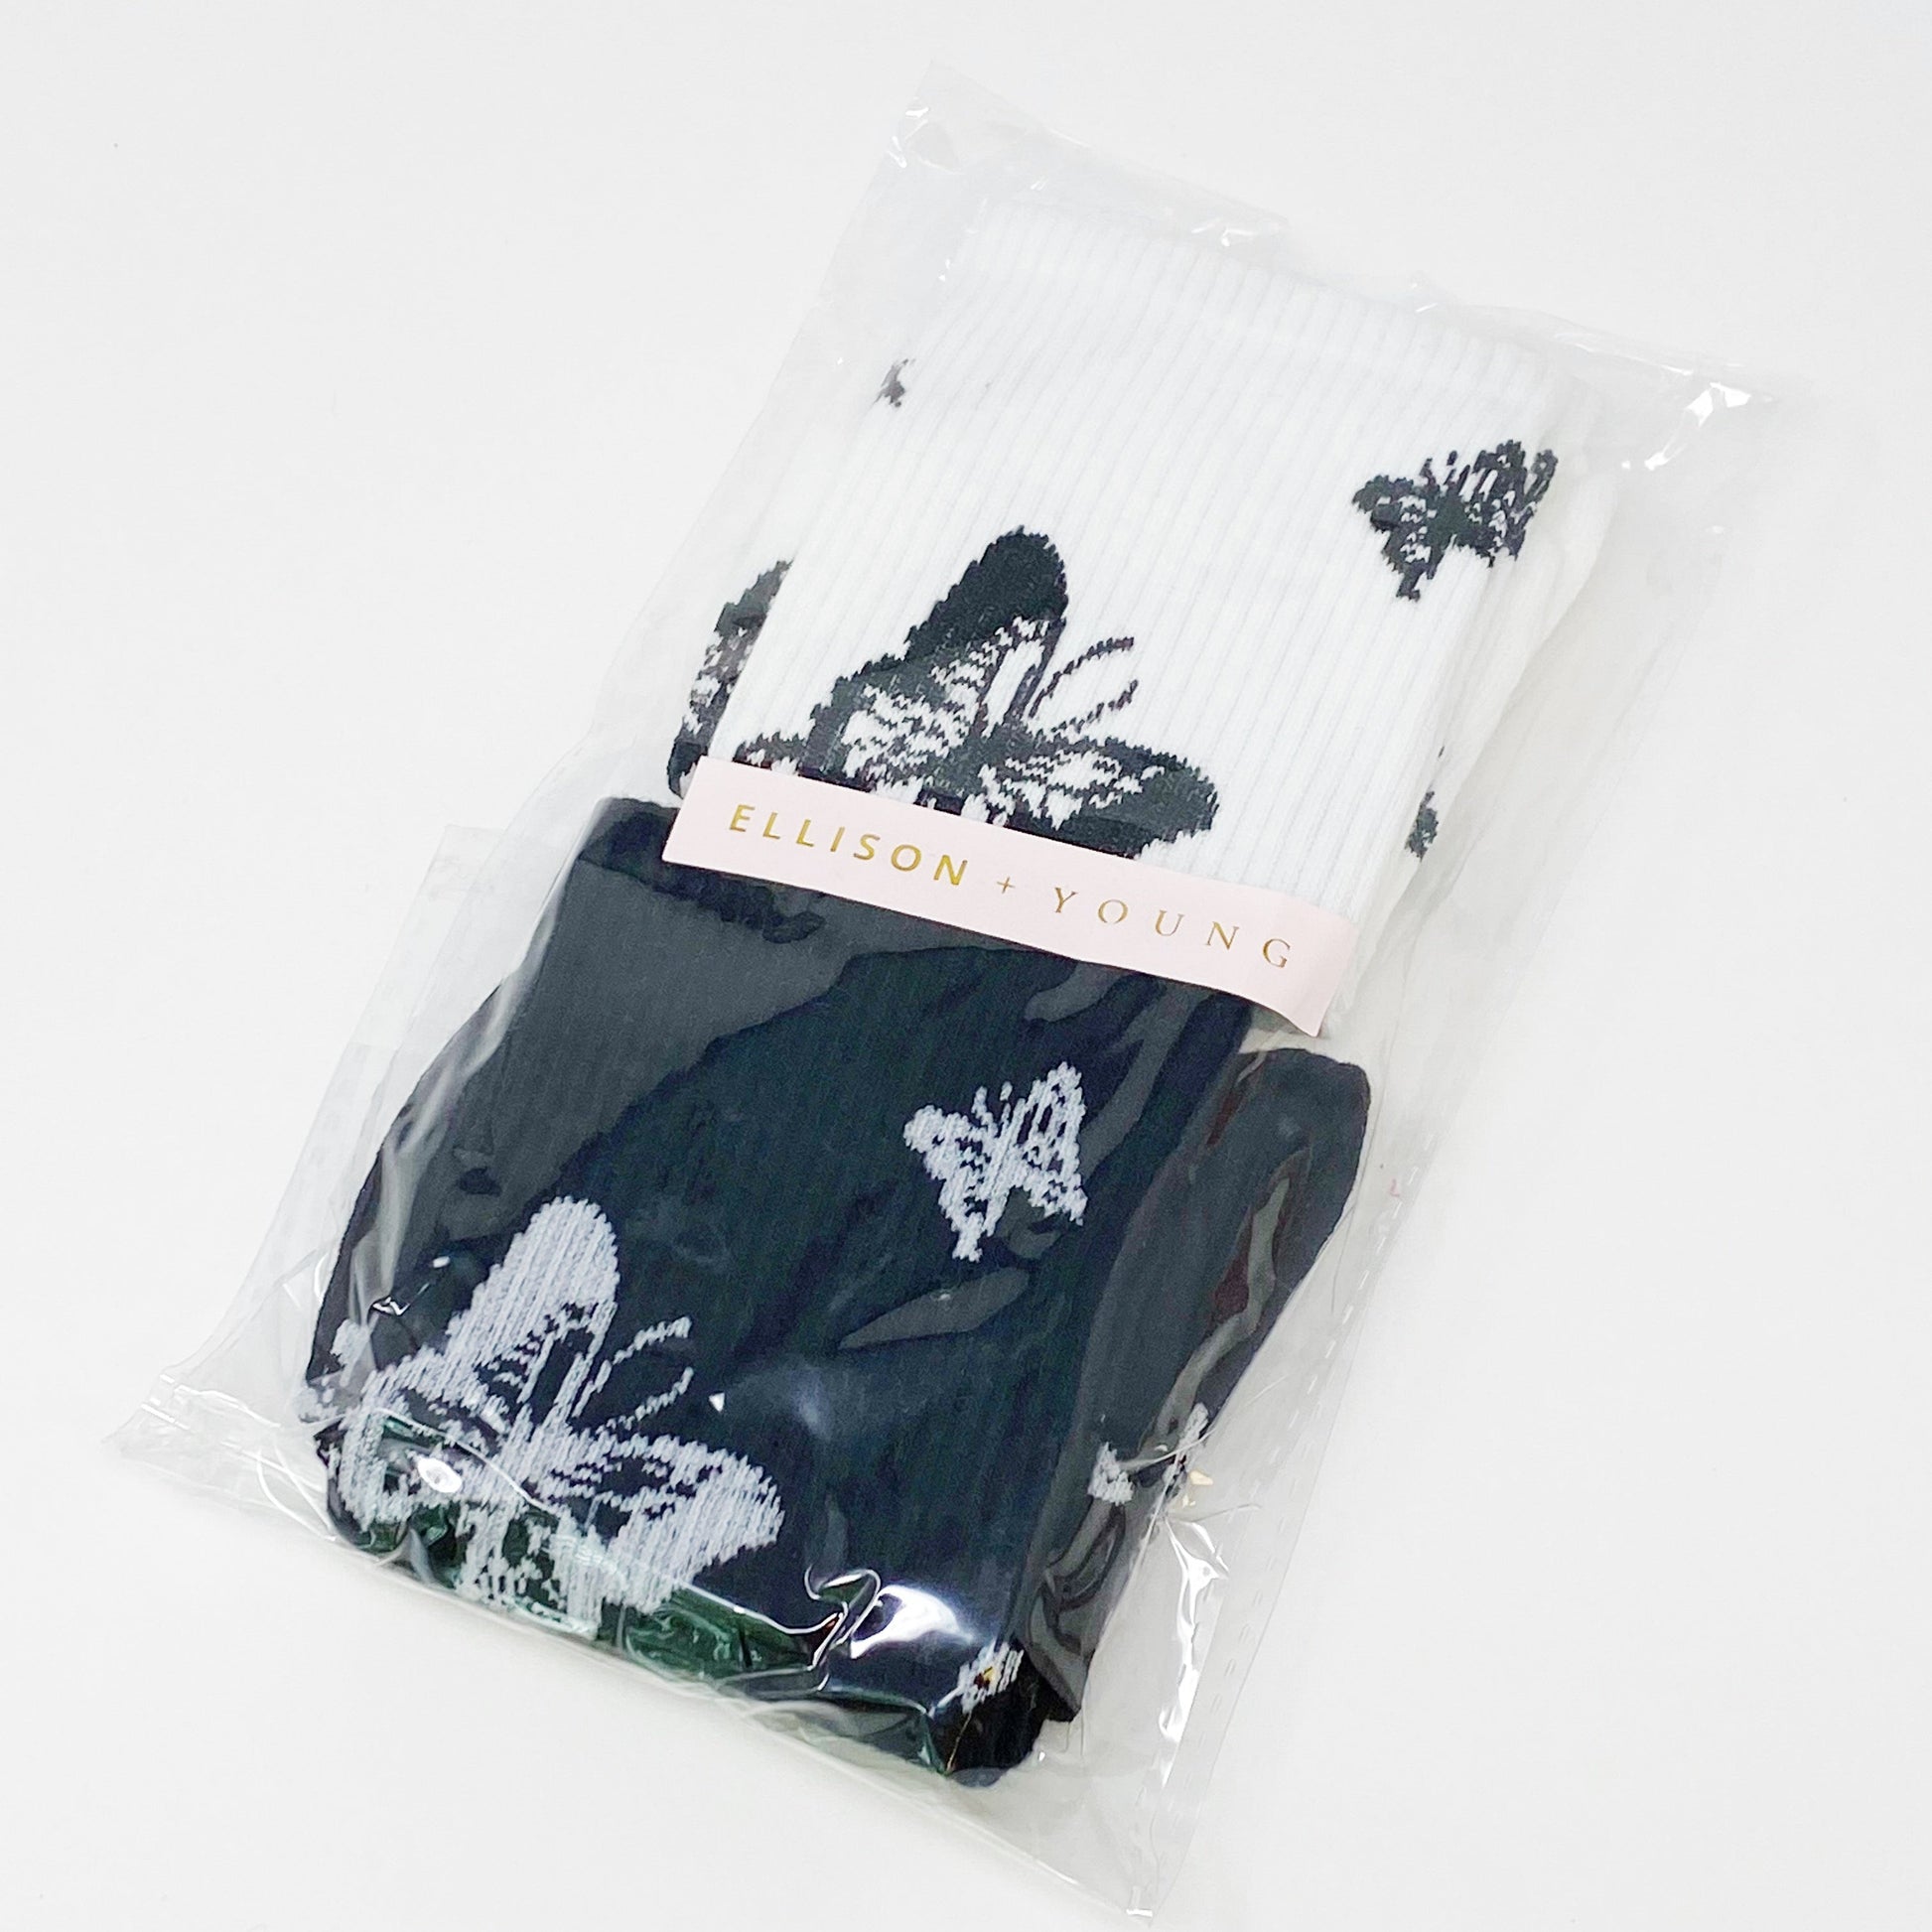 Butterfly In The Air Socks Set - Scarvesnthangs